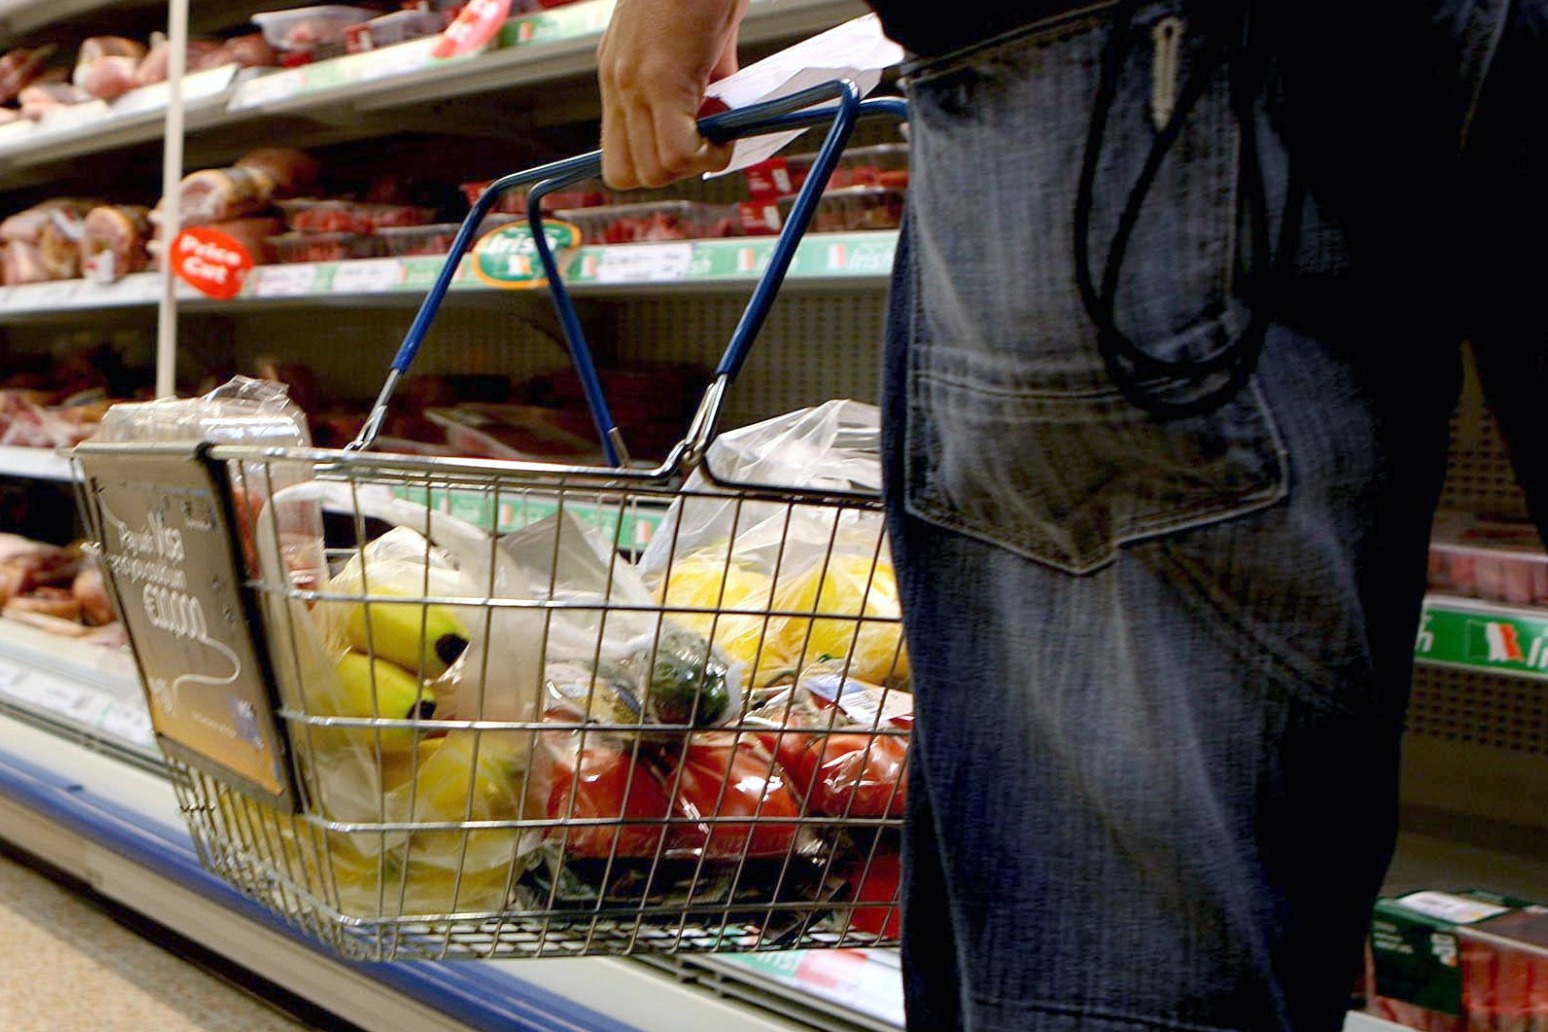 Trust in supermarkets at lowest level since horsemeat scandal, Which? finds 